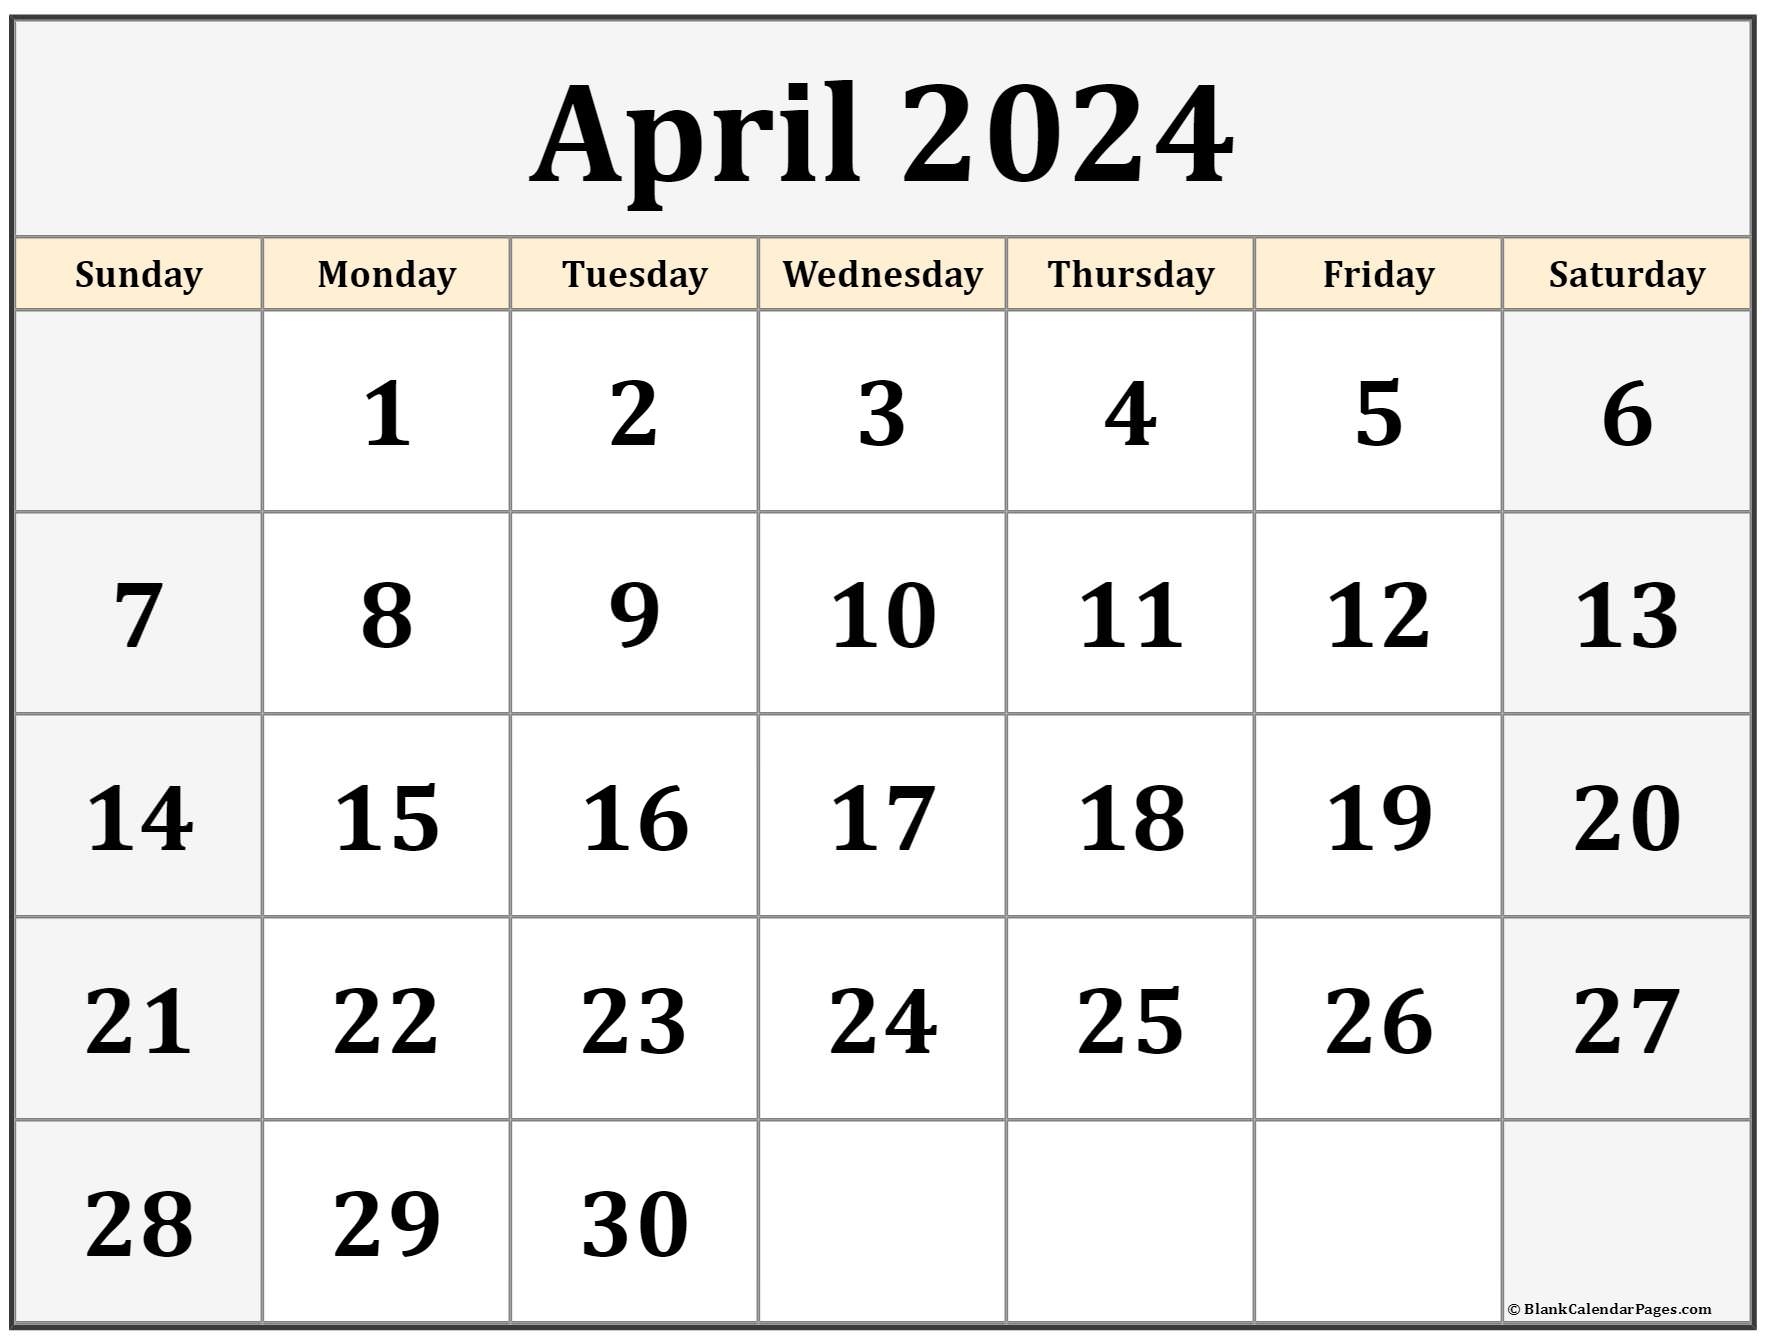 April 2024 Calendar Of The Month Free Printable April Calendar Of The - Free Printable Calendar April 2024 UK